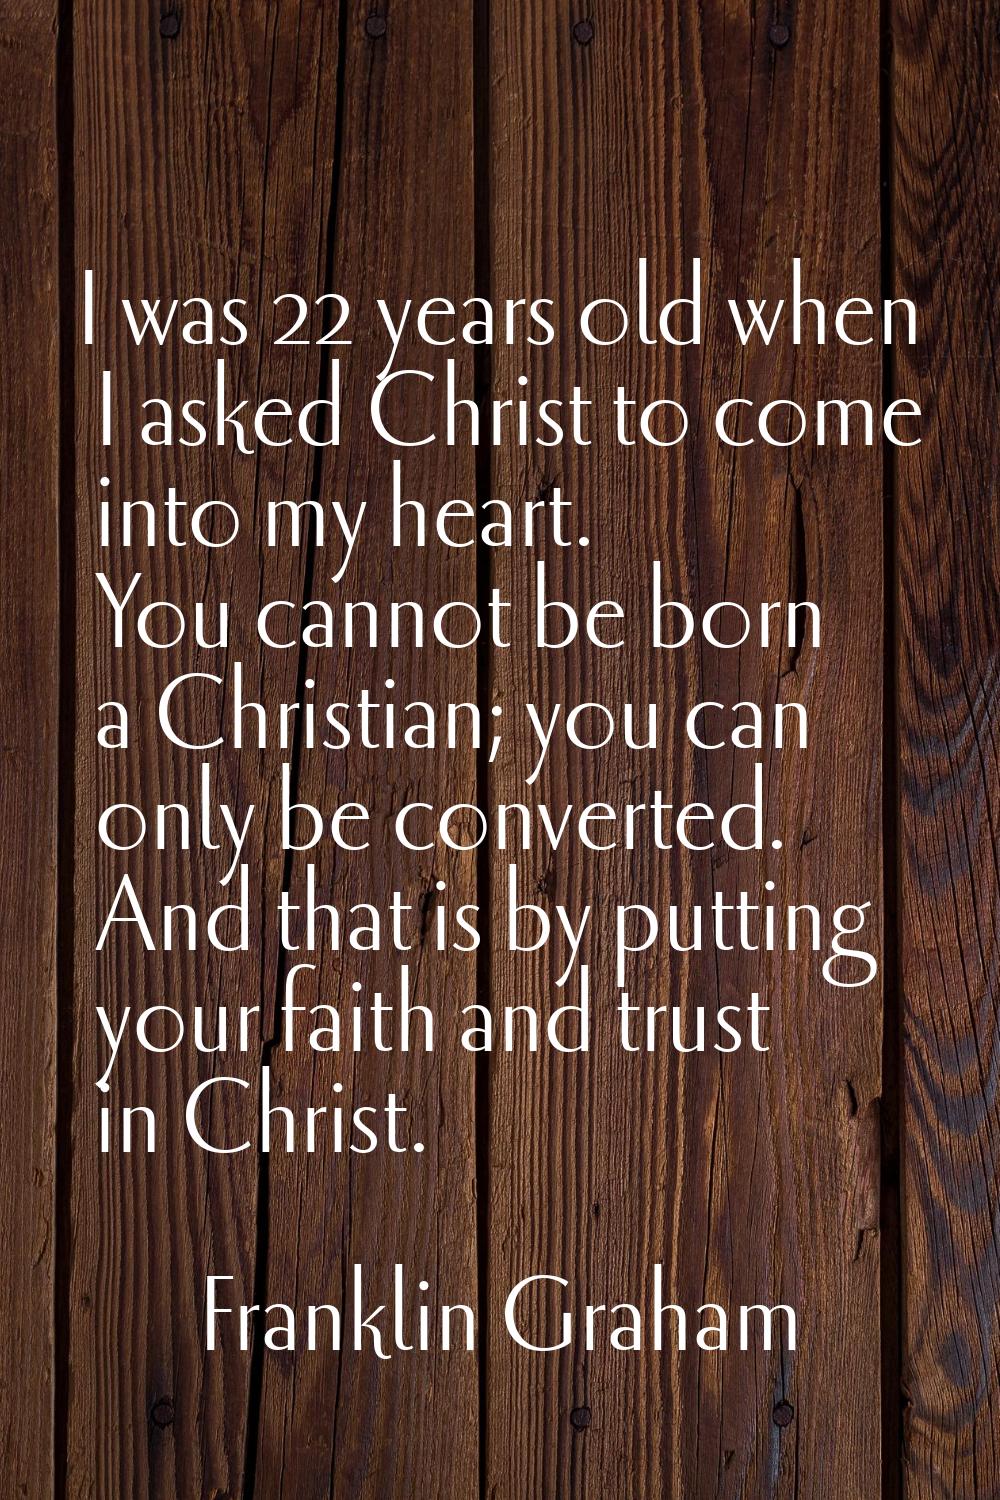 I was 22 years old when I asked Christ to come into my heart. You cannot be born a Christian; you c